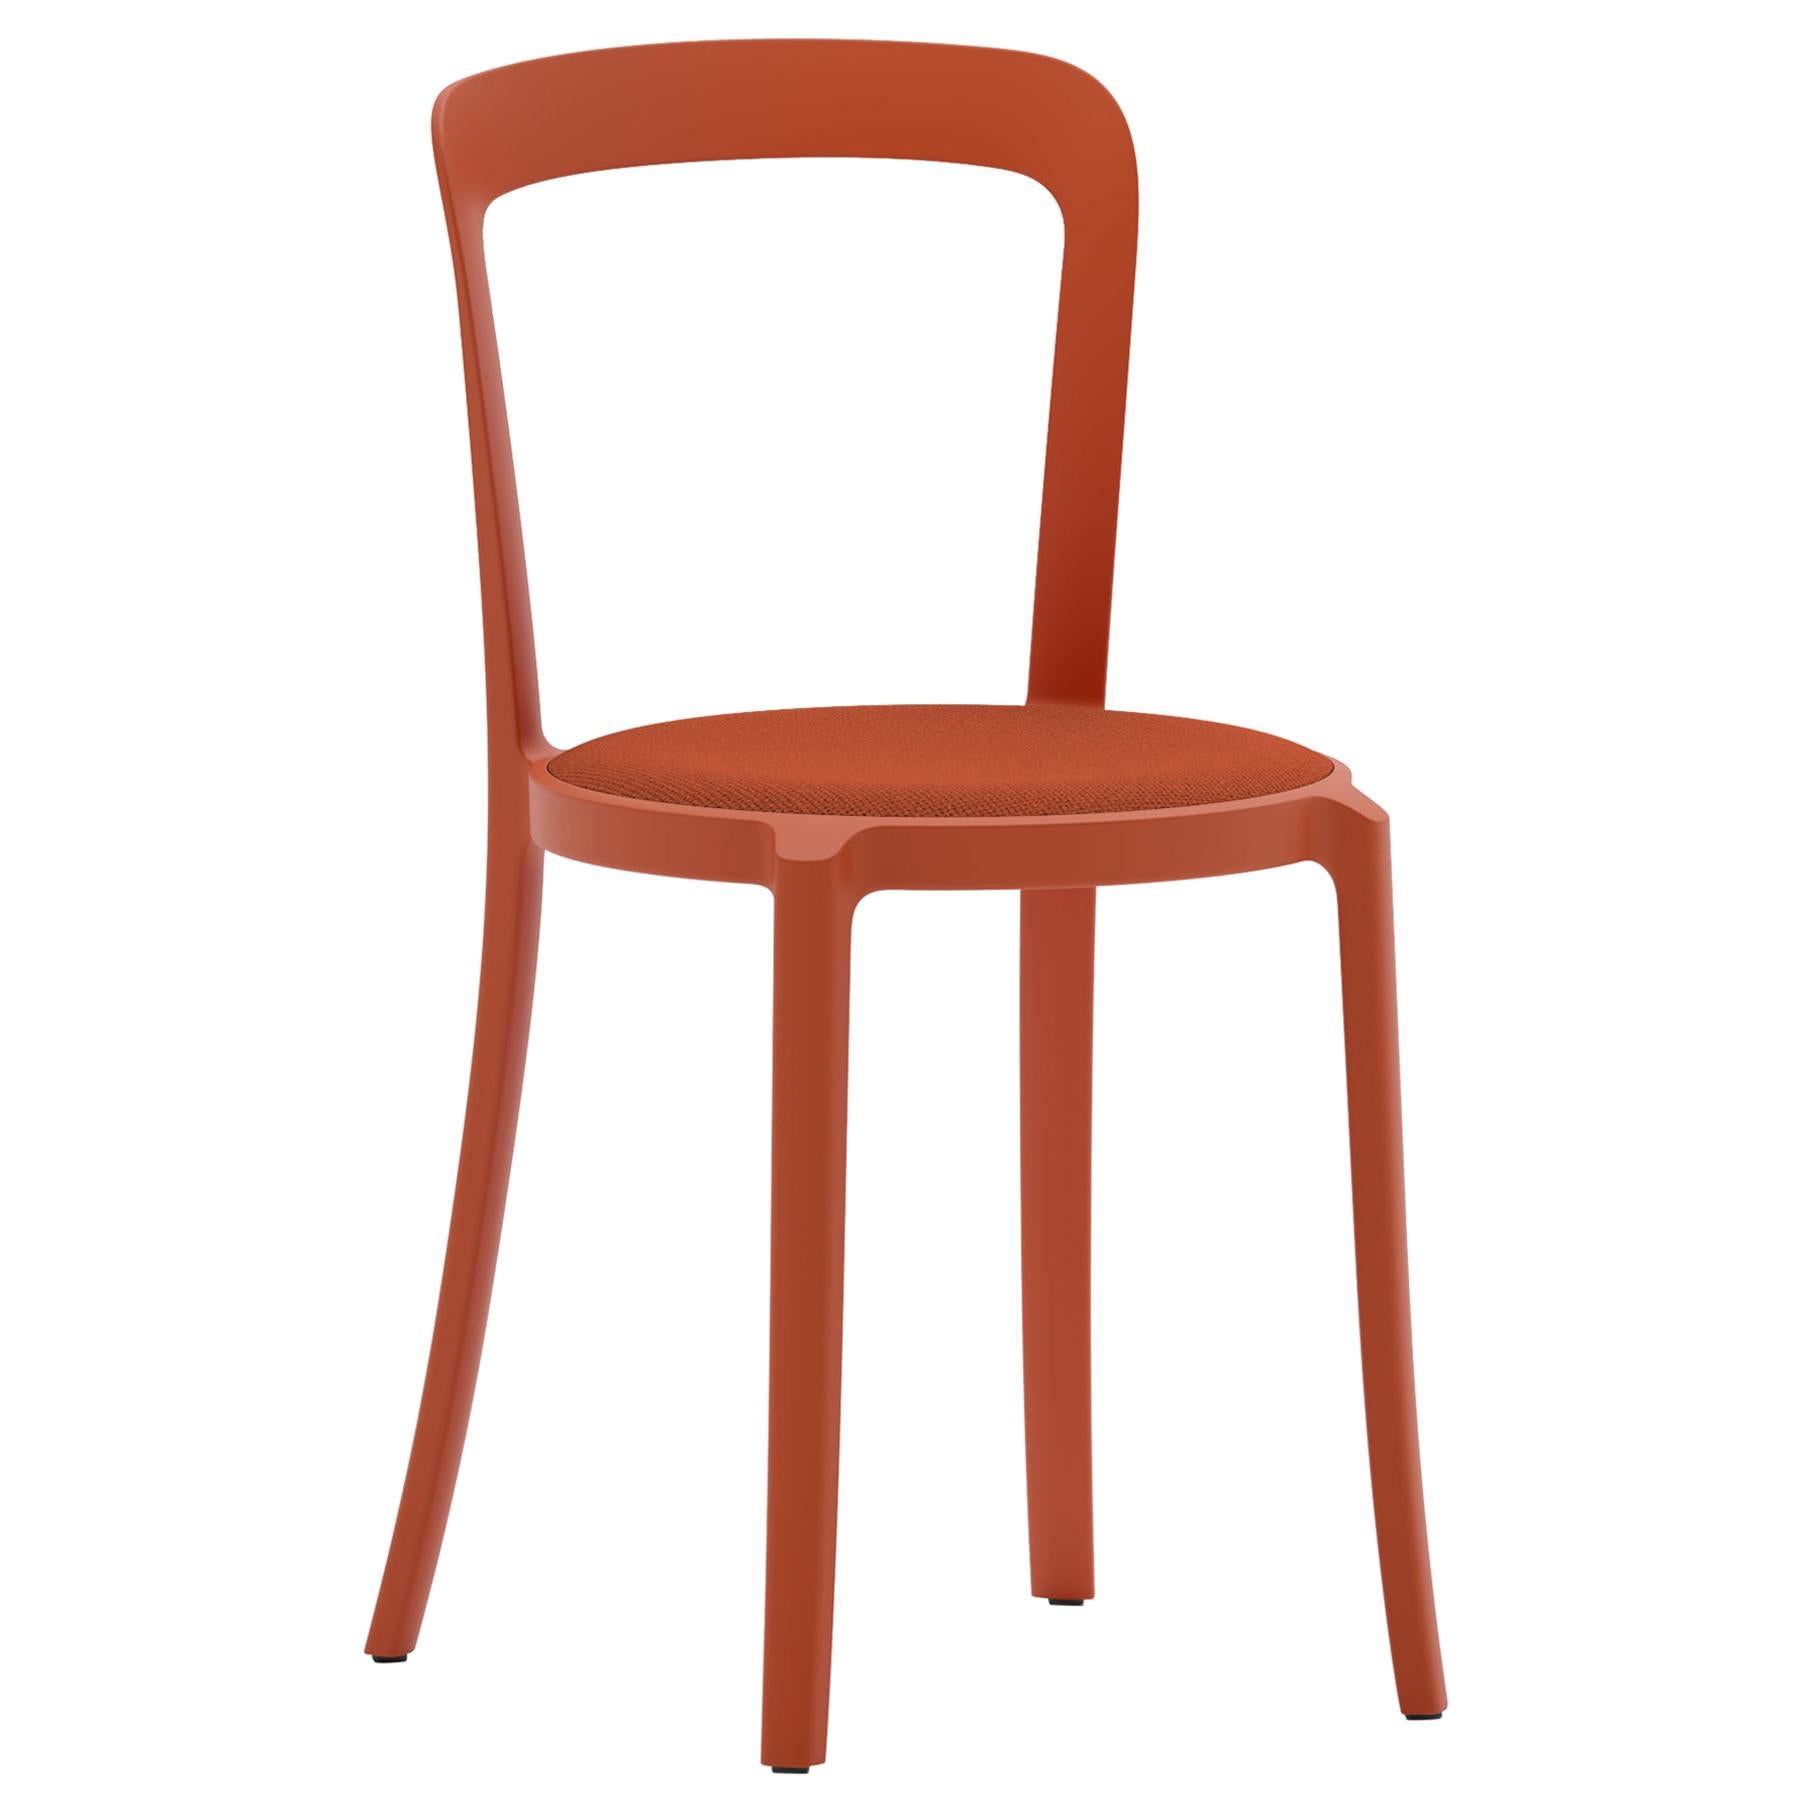 On & On Stacking Chair in Plastic with Orange Fabric 2 by Barber & Osgerby